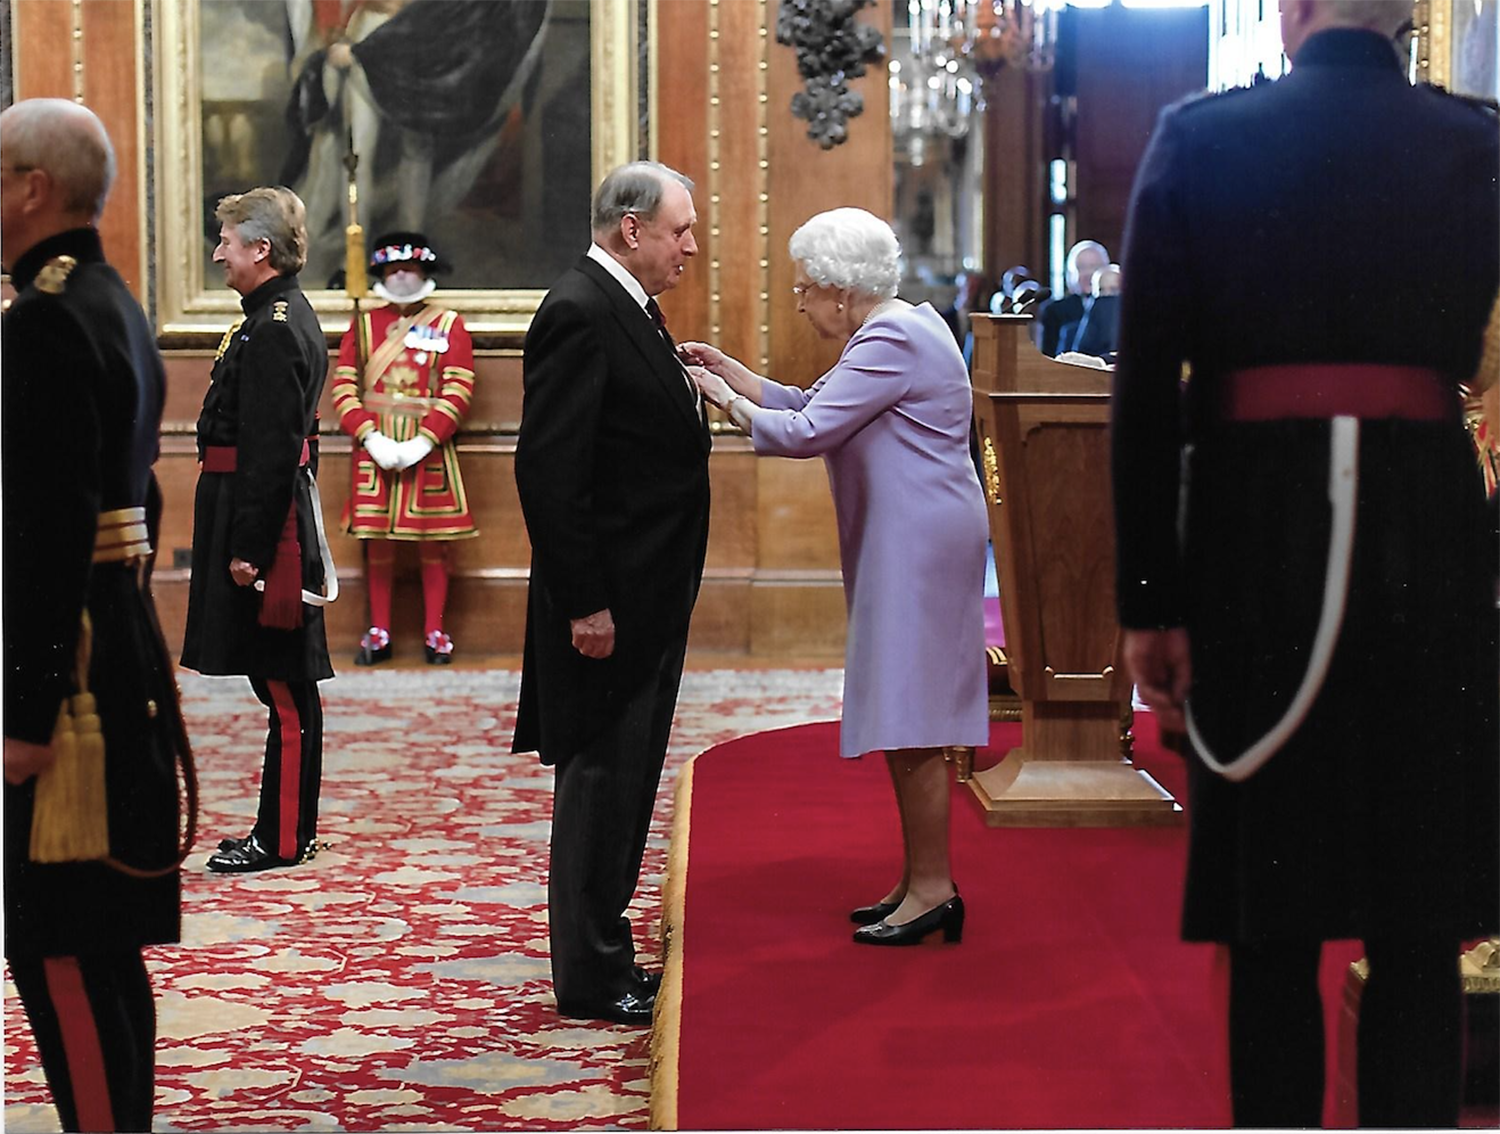 The Queen Medal Presentation